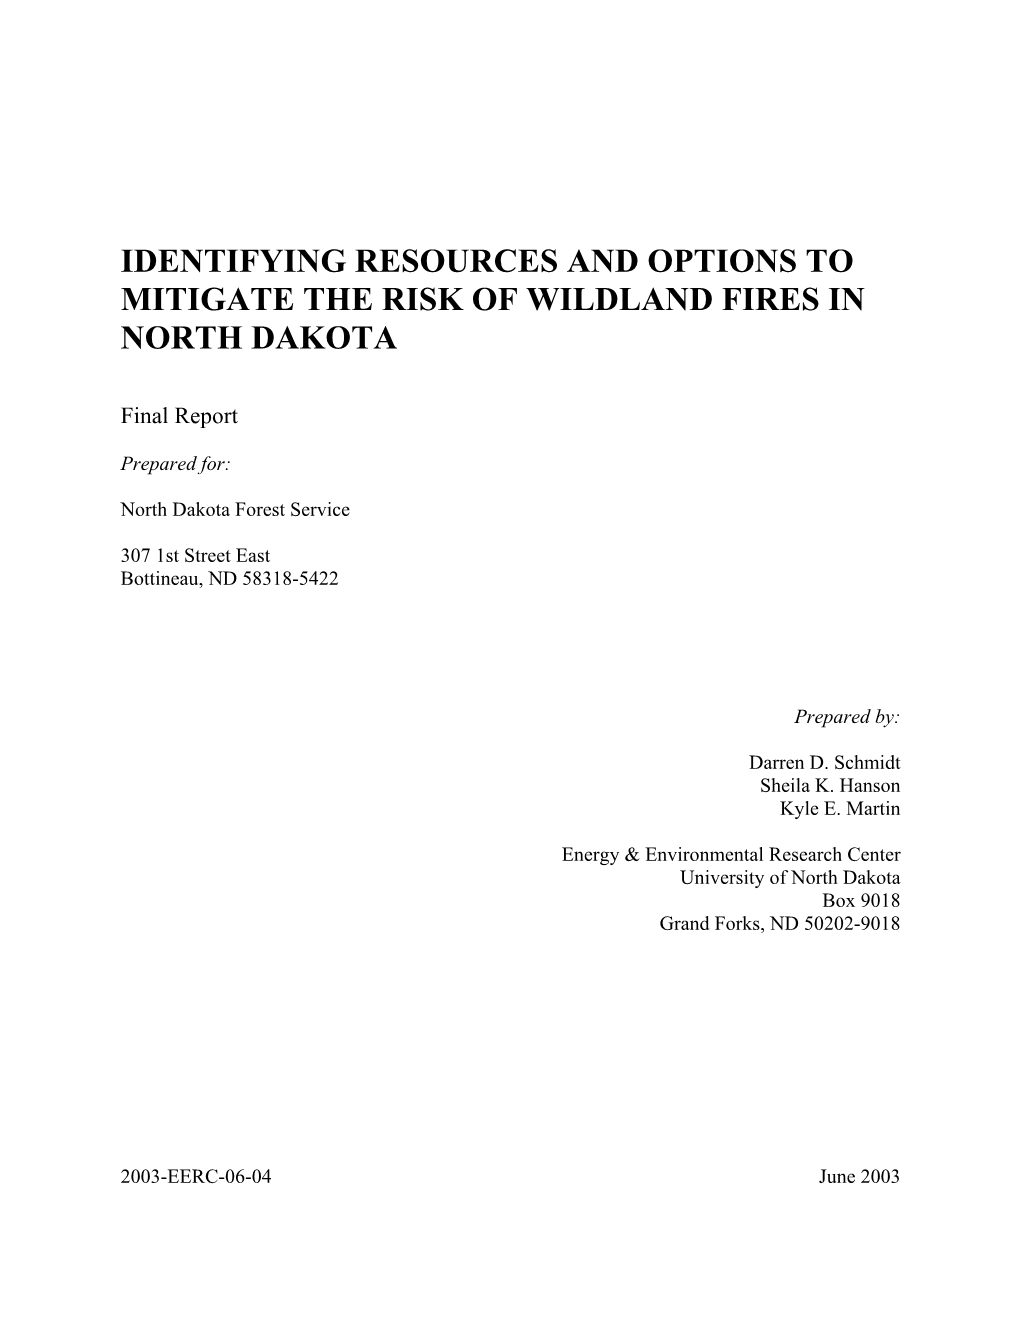 Identifying Resources and Options to Mitigate the Risk of Wildland Fires in North Dakota